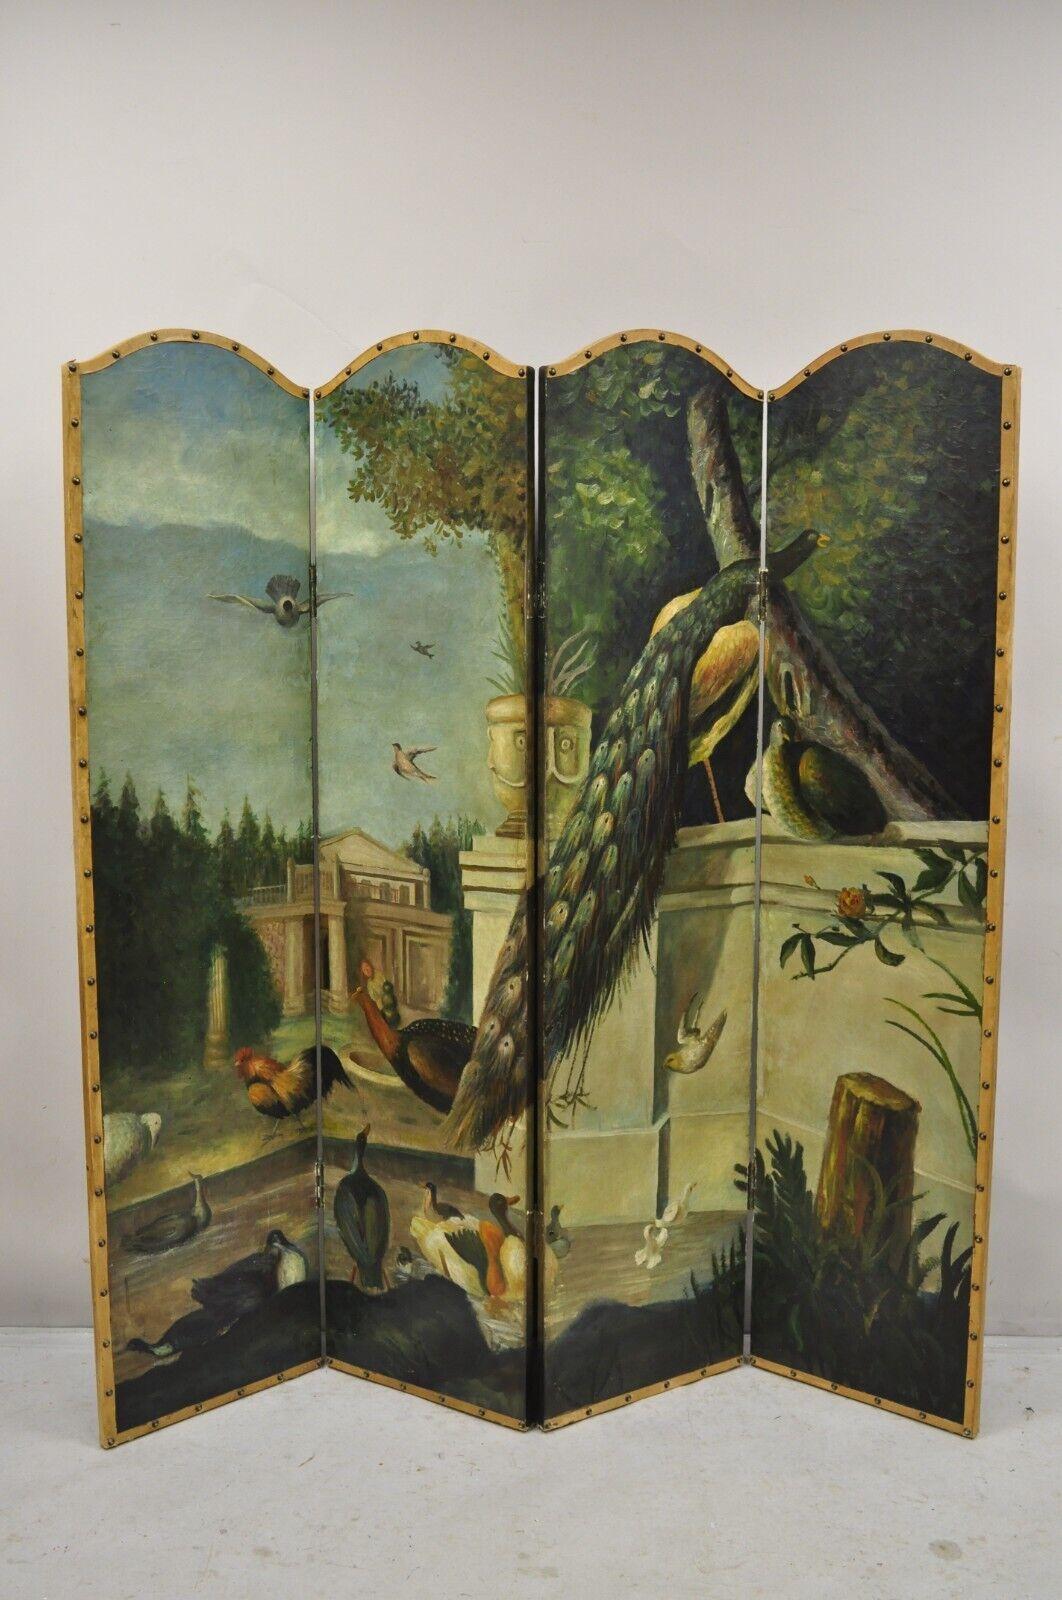 Antique Venetian Hand Painted Oil on Canvas Folding 4 Section Peacock Bird Screen Room Divider. Circa 1900.
Measurements: 
Overall: 67.25